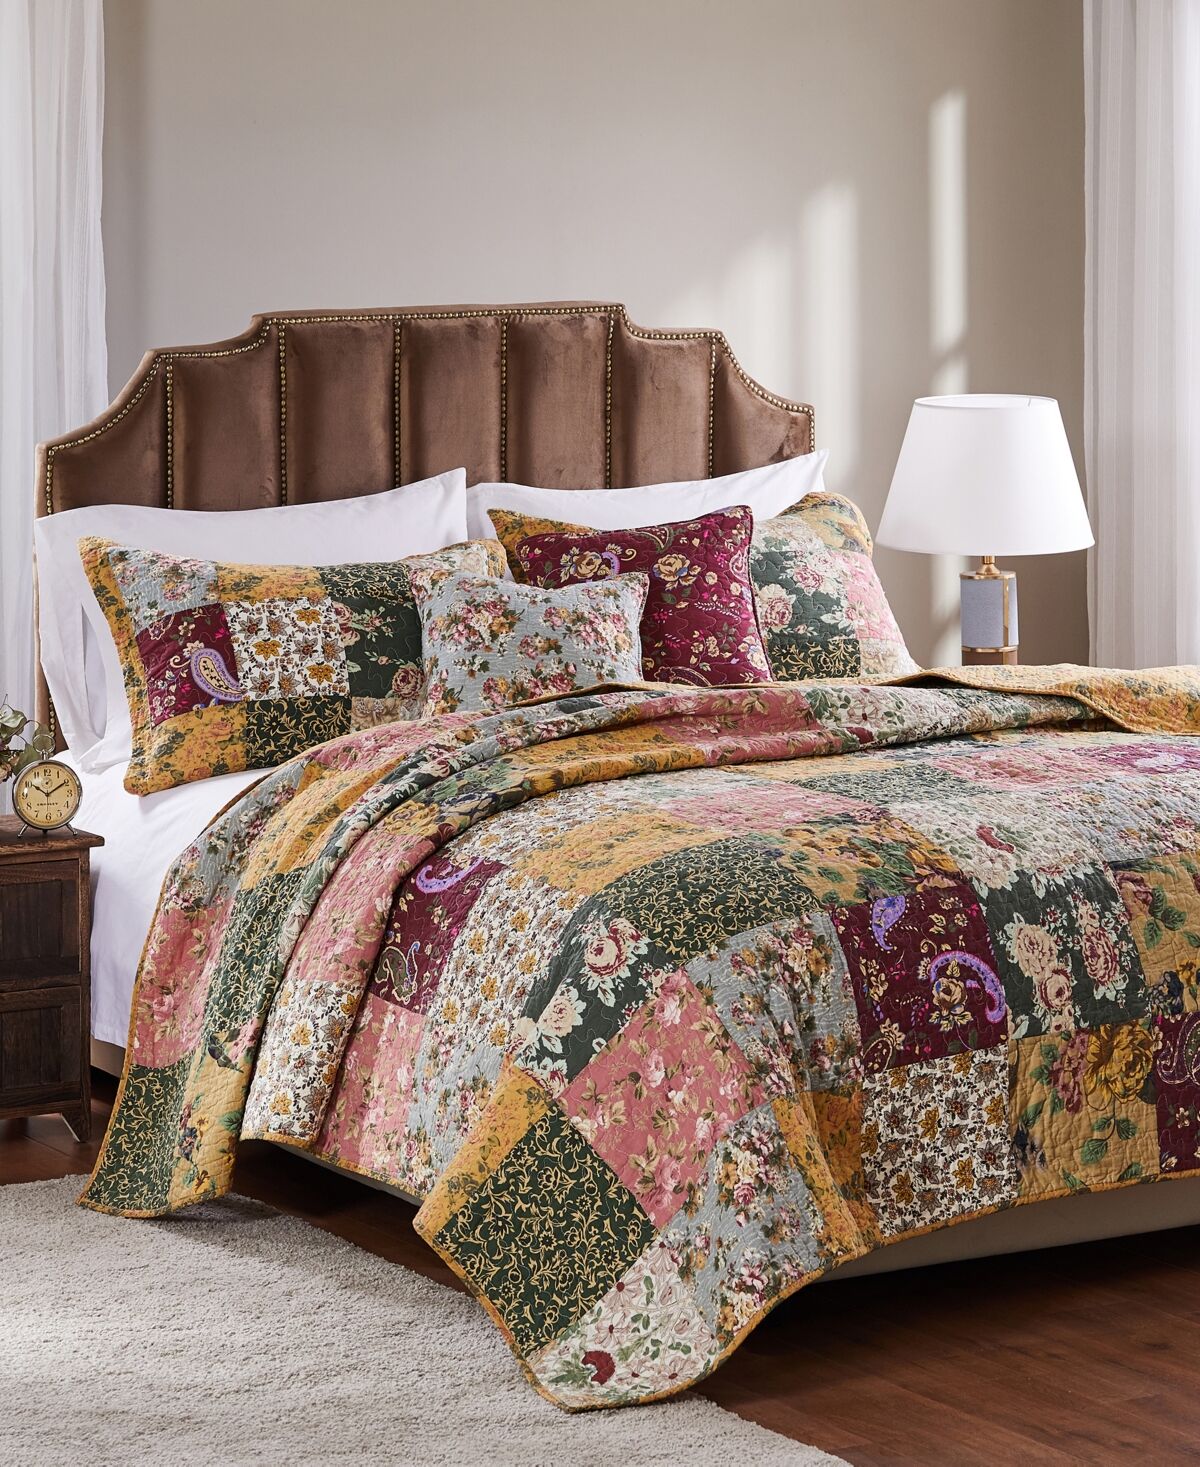 Greenland Home Fashions Antique Chic Cotton Authentic Patchwork 4 Piece Quilt Set, Twin/Twin Xl - Multi